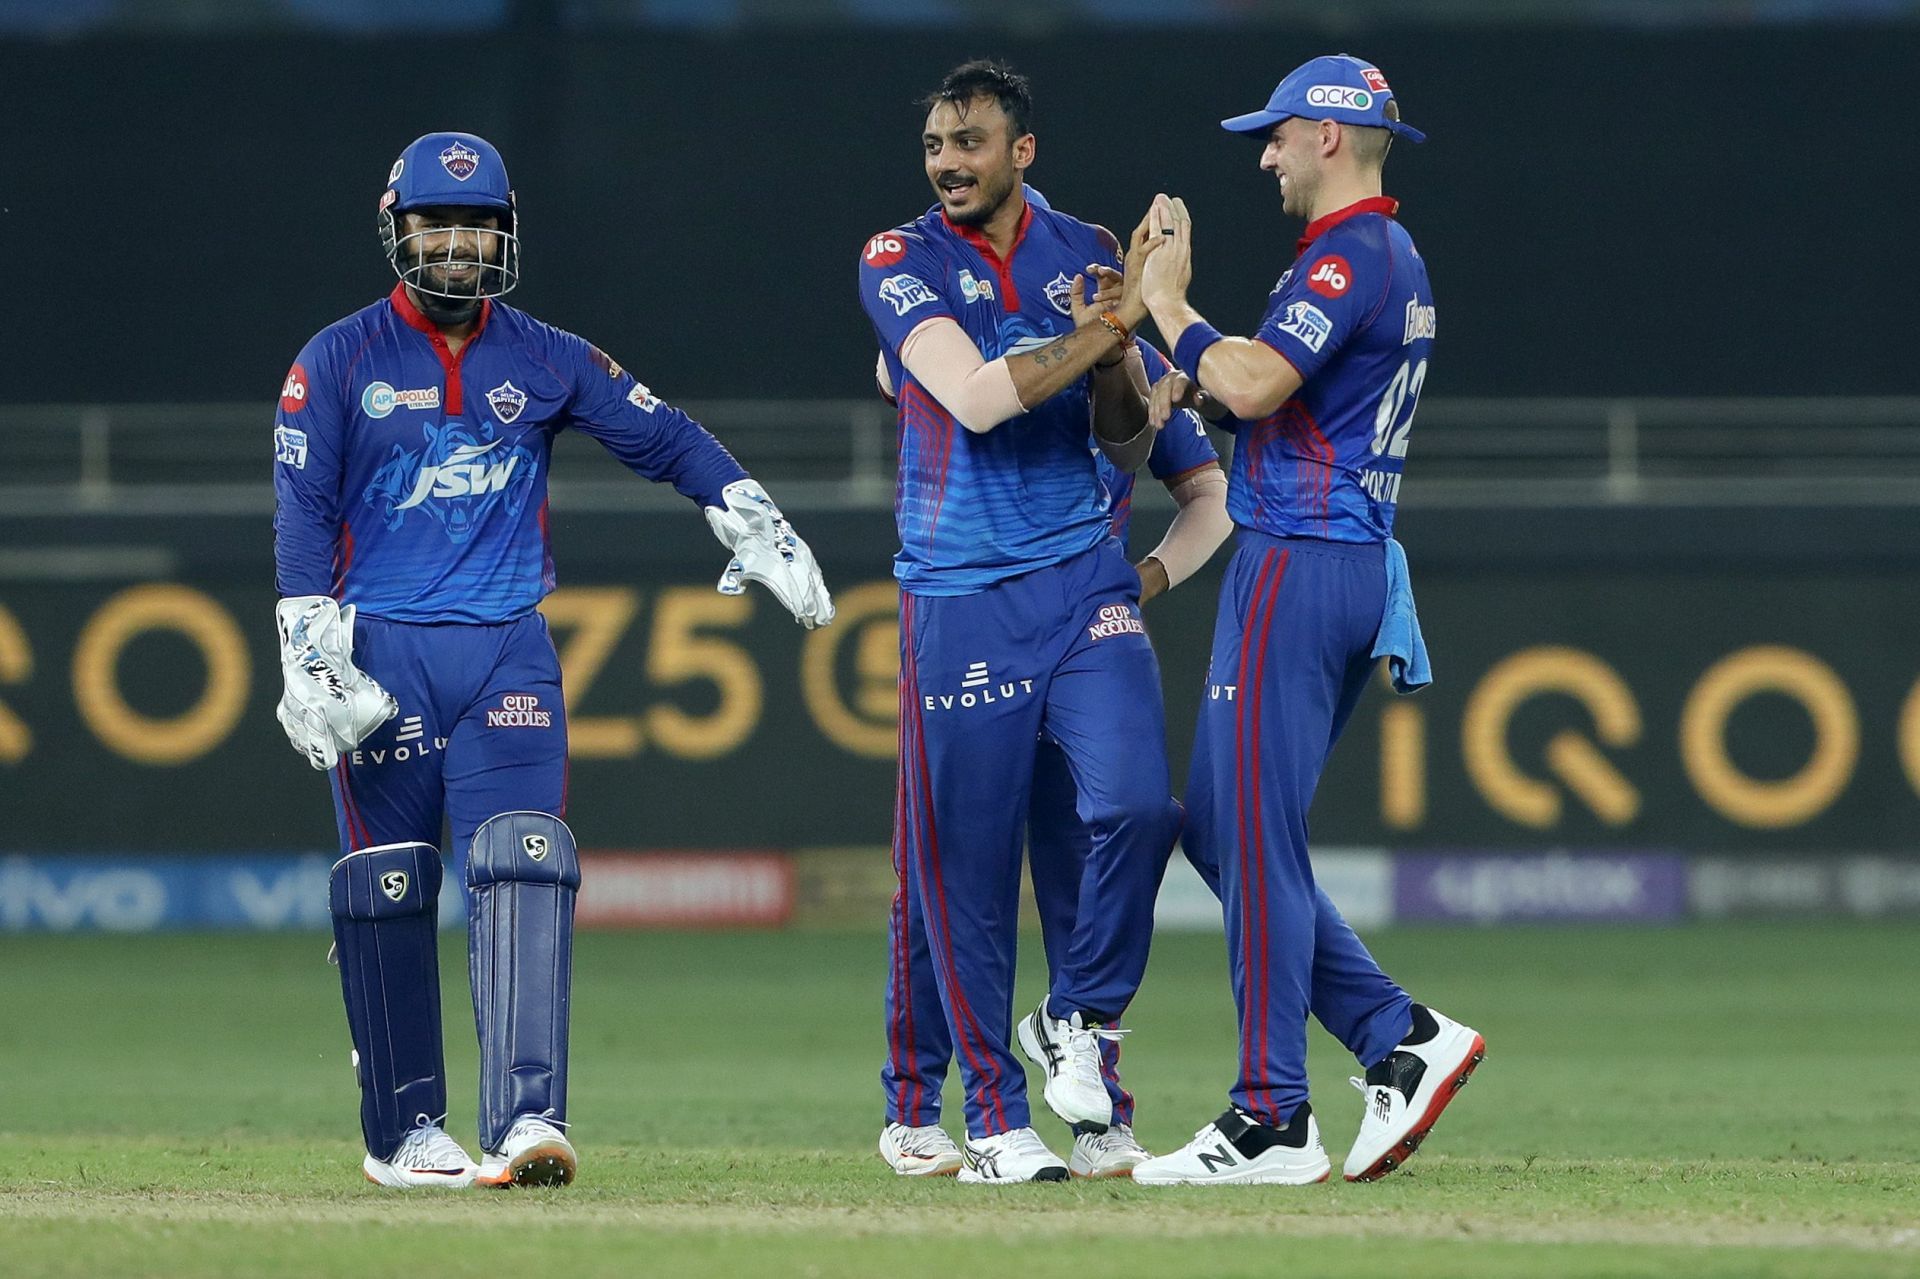 The Rishabh Pant-led Delhi Capitals will be eyeing their maiden title (Picture Credits: IPL).